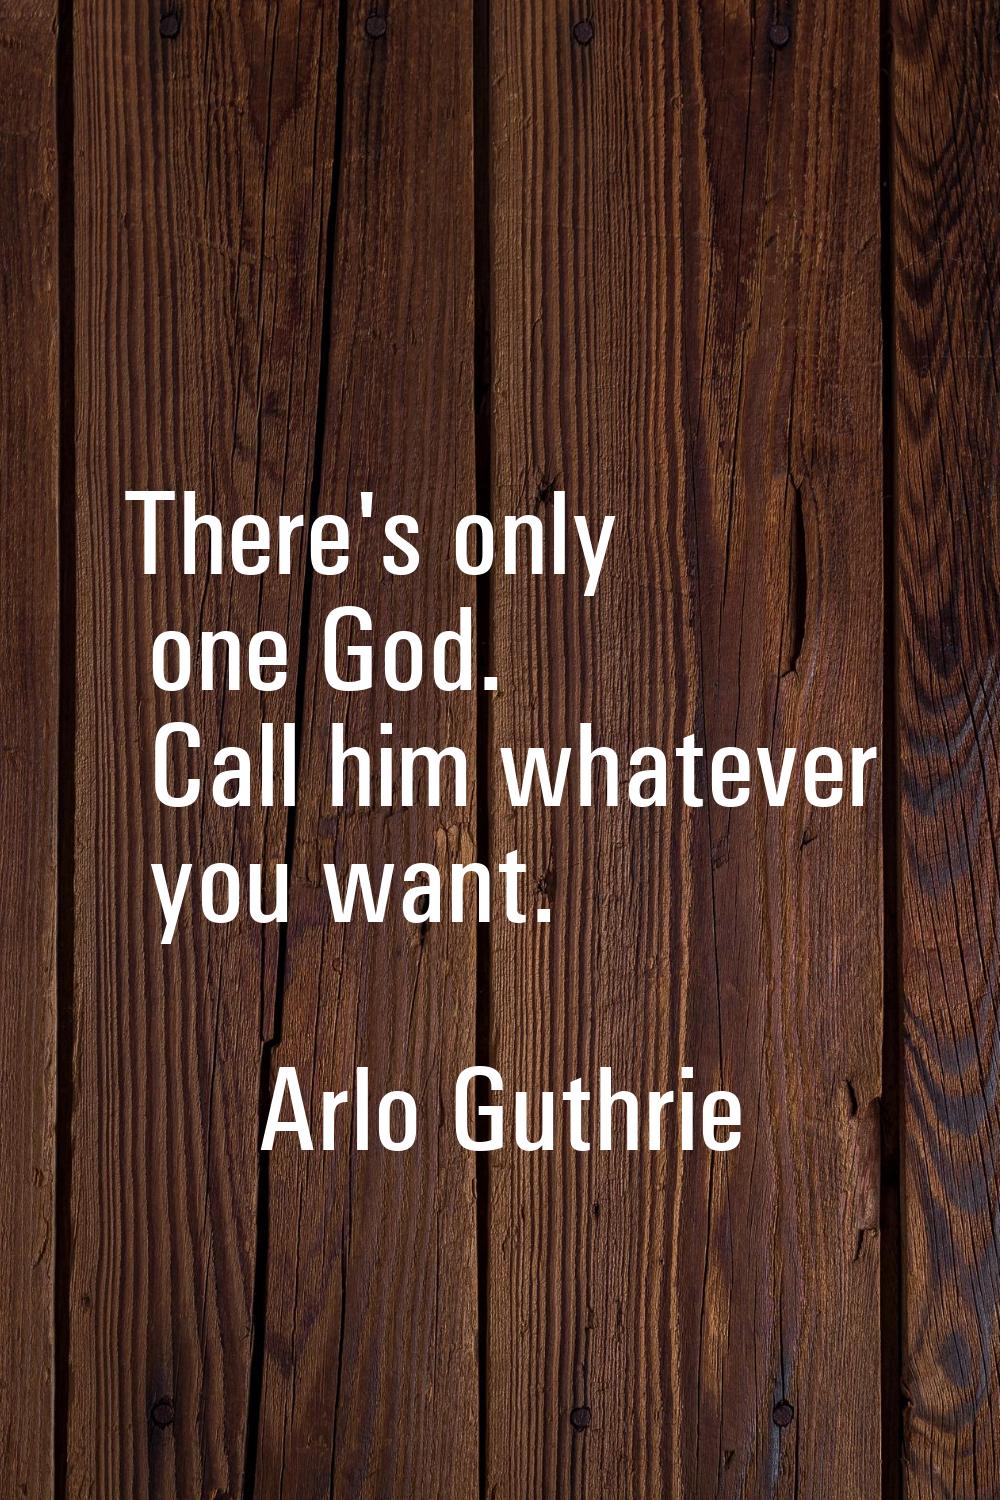 There's only one God. Call him whatever you want.